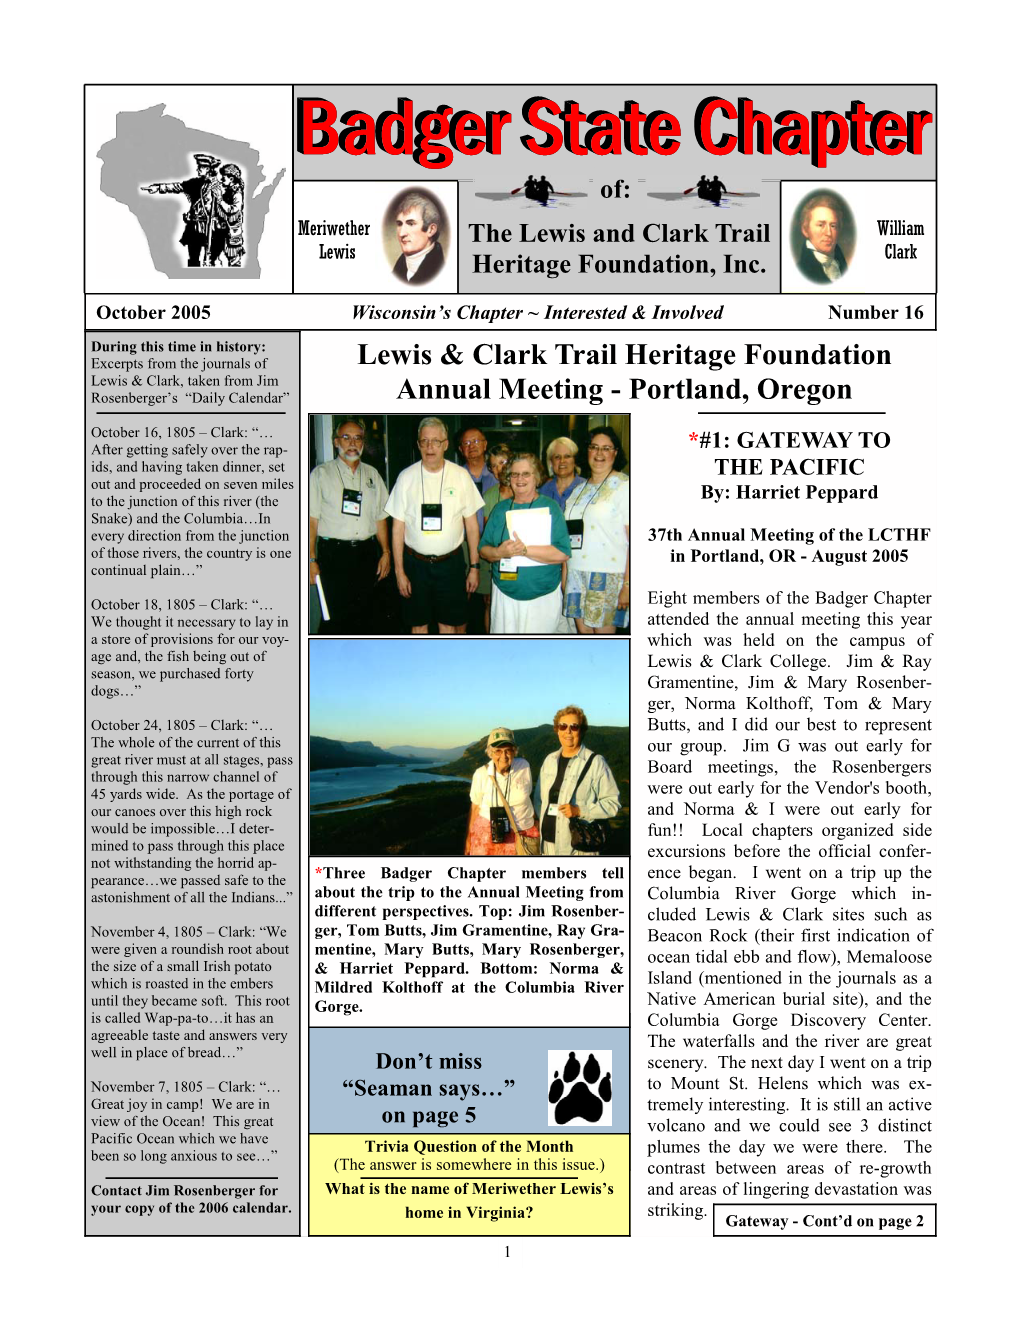 Lewis & Clark Trail Heritage Foundation Annual Meeting